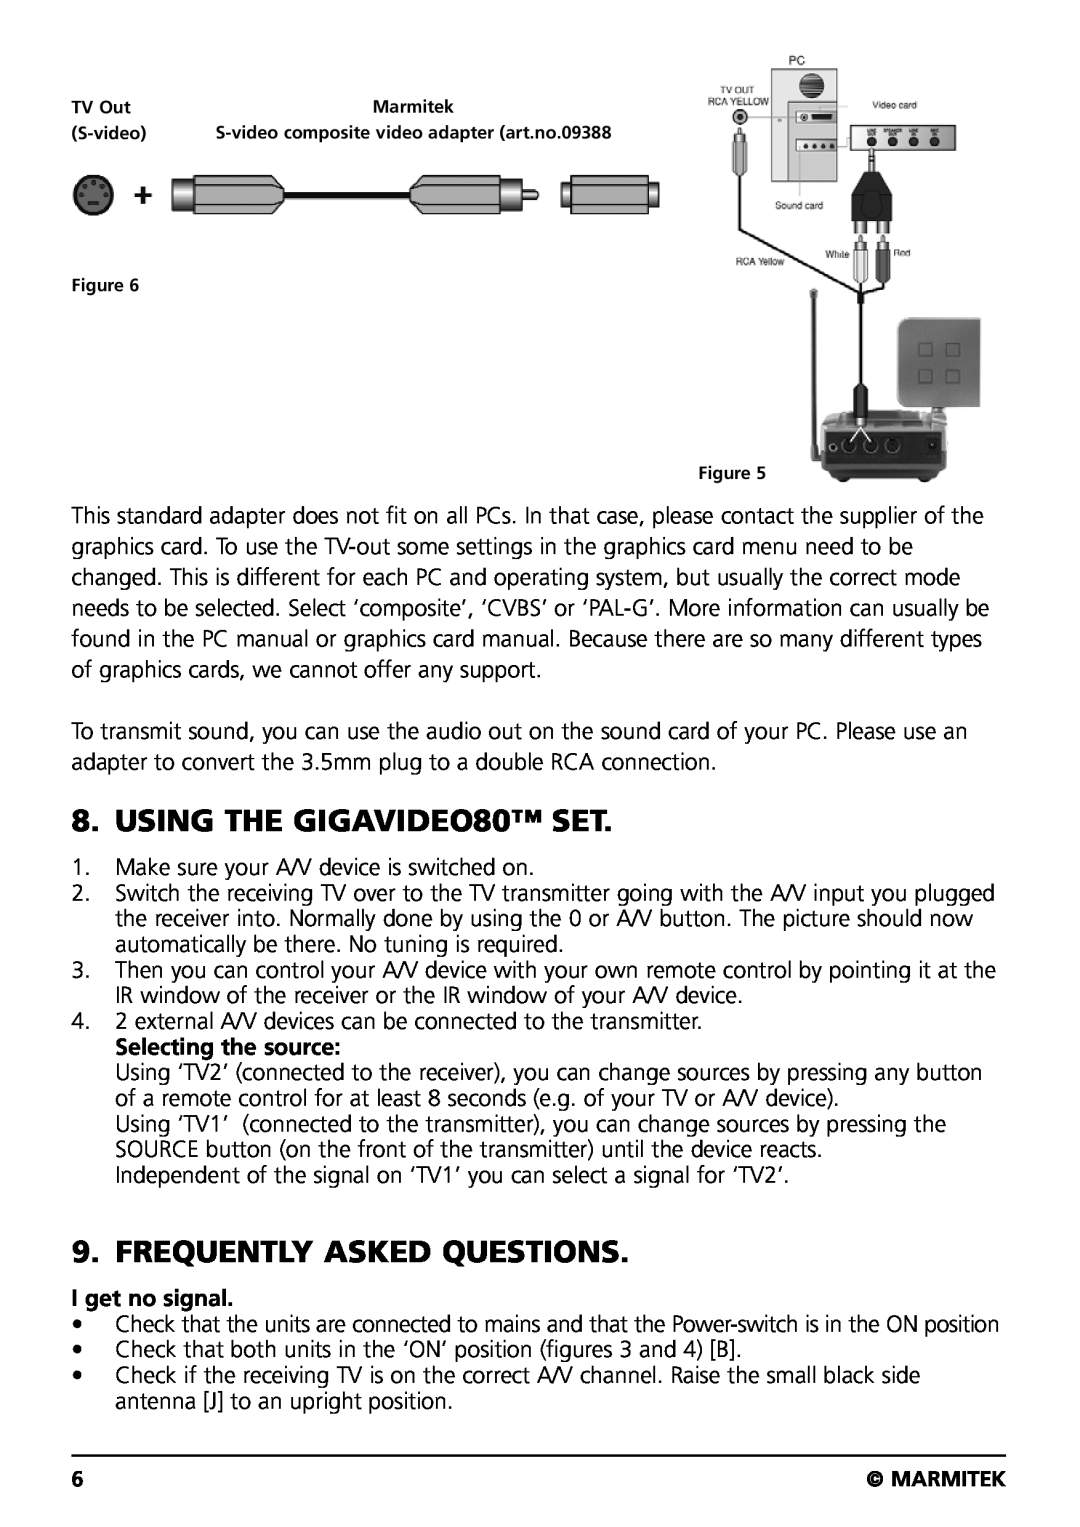 Marmitek user manual USING THE GIGAVIDEO80 SET, Frequently Asked Questions, Selecting the source, I get no signal 